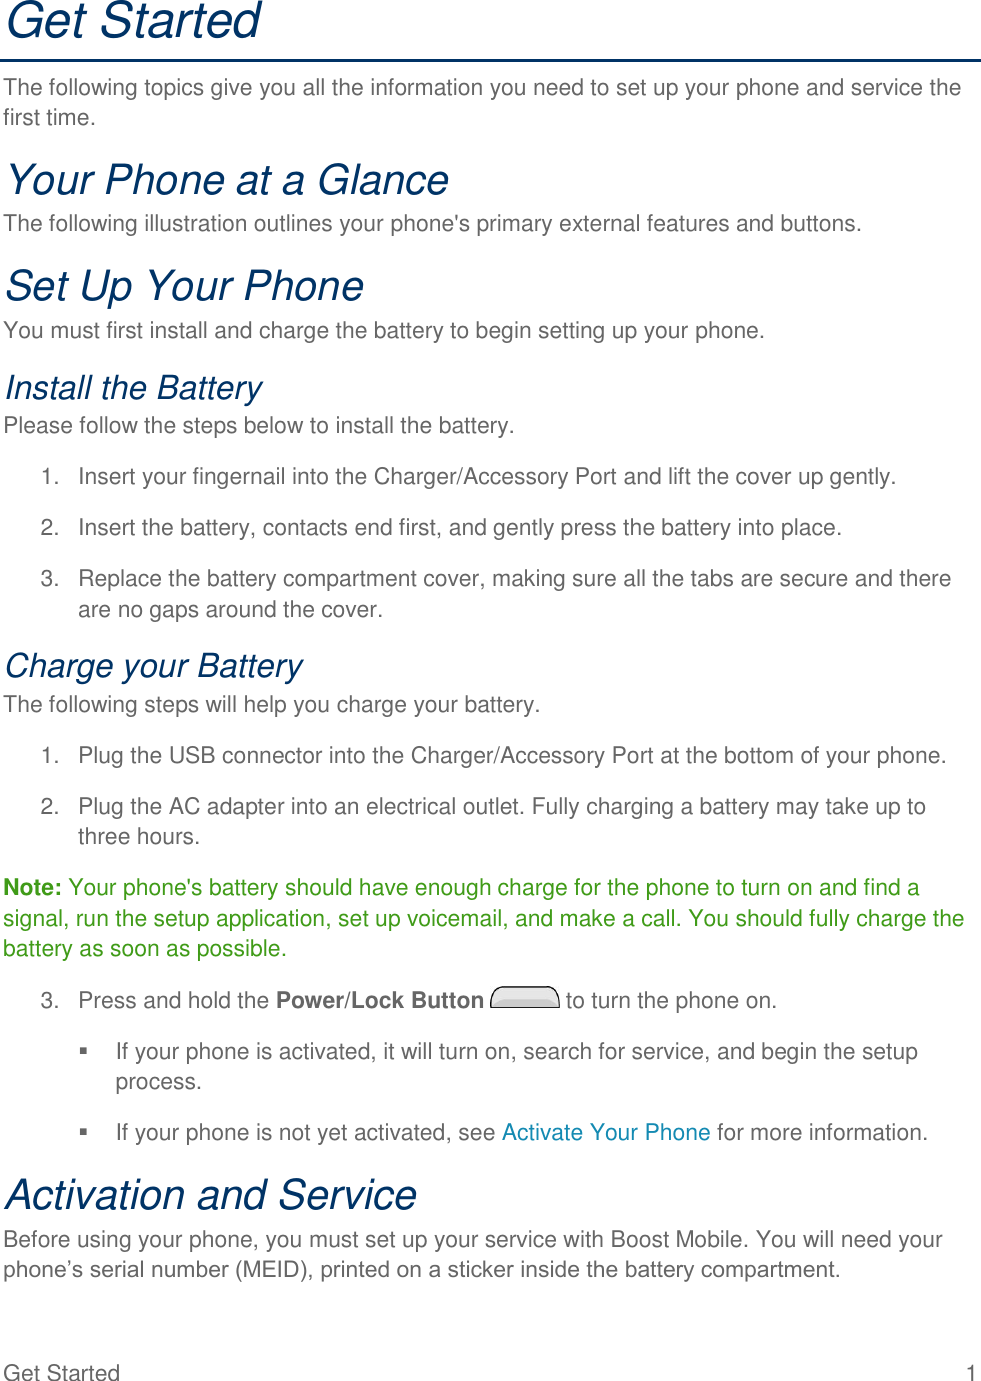 Get Started  1 Get Started The following topics give you all the information you need to set up your phone and service the first time. Your Phone at a Glance The following illustration outlines your phone&apos;s primary external features and buttons. Set Up Your Phone You must first install and charge the battery to begin setting up your phone. Install the Battery Please follow the steps below to install the battery. 1.  Insert your fingernail into the Charger/Accessory Port and lift the cover up gently. 2.  Insert the battery, contacts end first, and gently press the battery into place. 3.  Replace the battery compartment cover, making sure all the tabs are secure and there are no gaps around the cover. Charge your Battery The following steps will help you charge your battery. 1.  Plug the USB connector into the Charger/Accessory Port at the bottom of your phone. 2.  Plug the AC adapter into an electrical outlet. Fully charging a battery may take up to three hours. Note: Your phone&apos;s battery should have enough charge for the phone to turn on and find a signal, run the setup application, set up voicemail, and make a call. You should fully charge the battery as soon as possible. 3.  Press and hold the Power/Lock Button   to turn the phone on.   If your phone is activated, it will turn on, search for service, and begin the setup process.   If your phone is not yet activated, see Activate Your Phone for more information. Activation and Service Before using your phone, you must set up your service with Boost Mobile. You will need your phone’s serial number (MEID), printed on a sticker inside the battery compartment. 